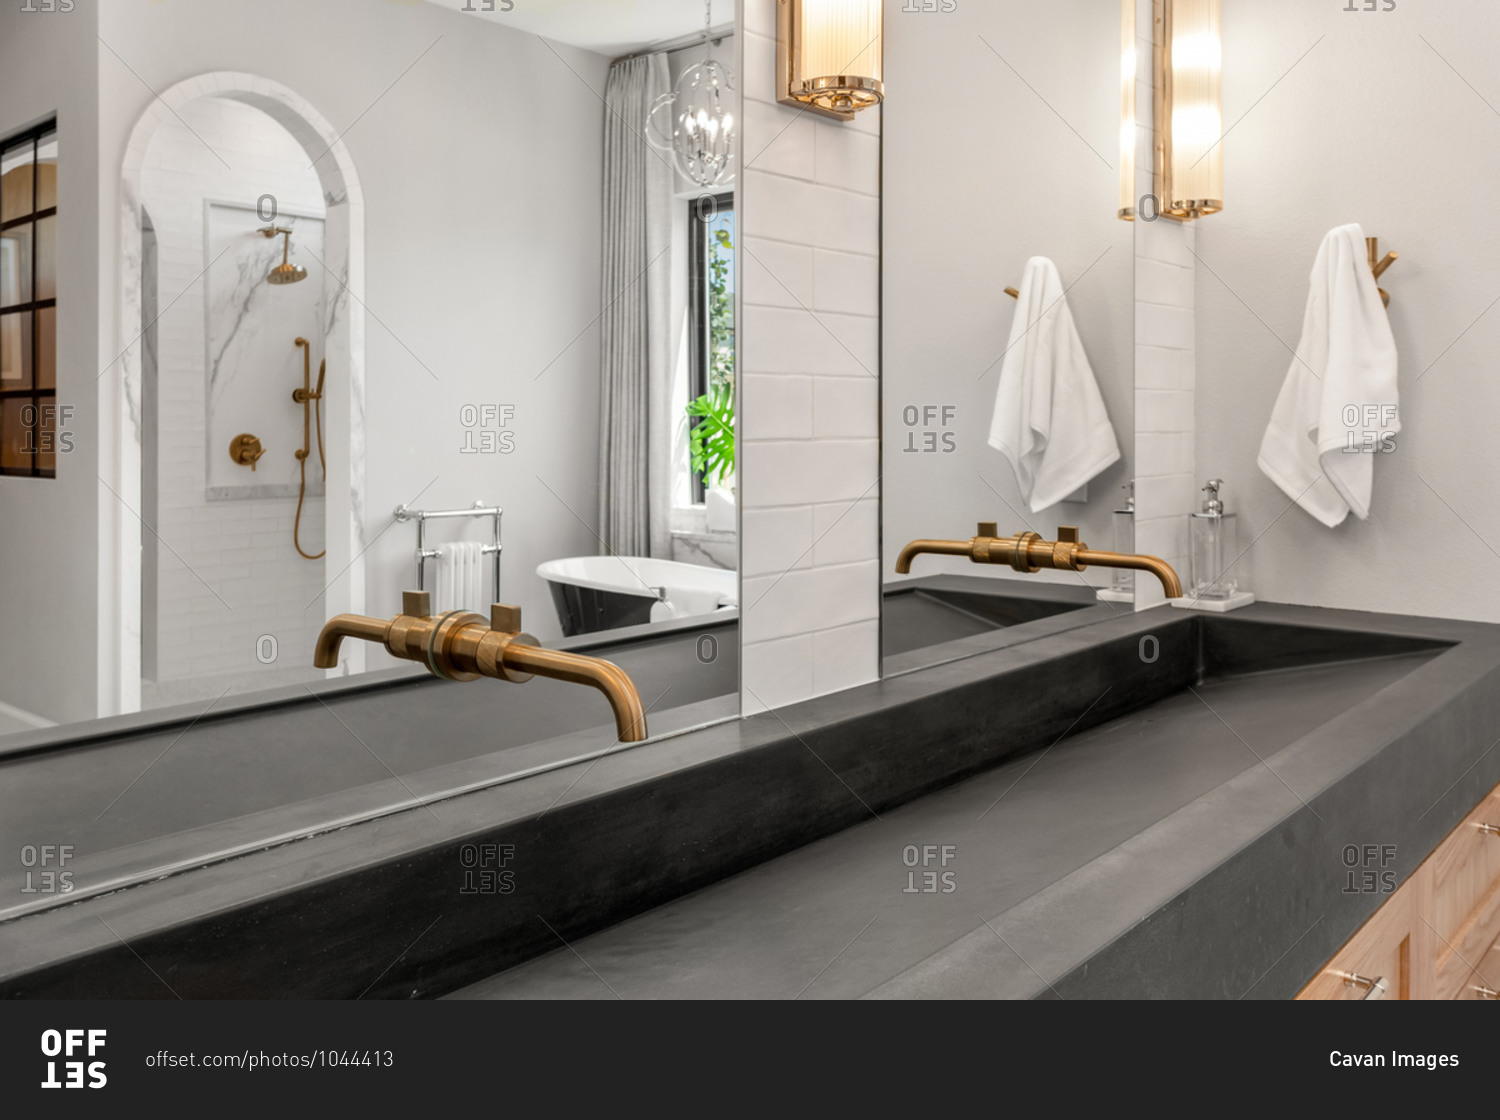 Bathroom in luxury home with concrete sink and double vanity